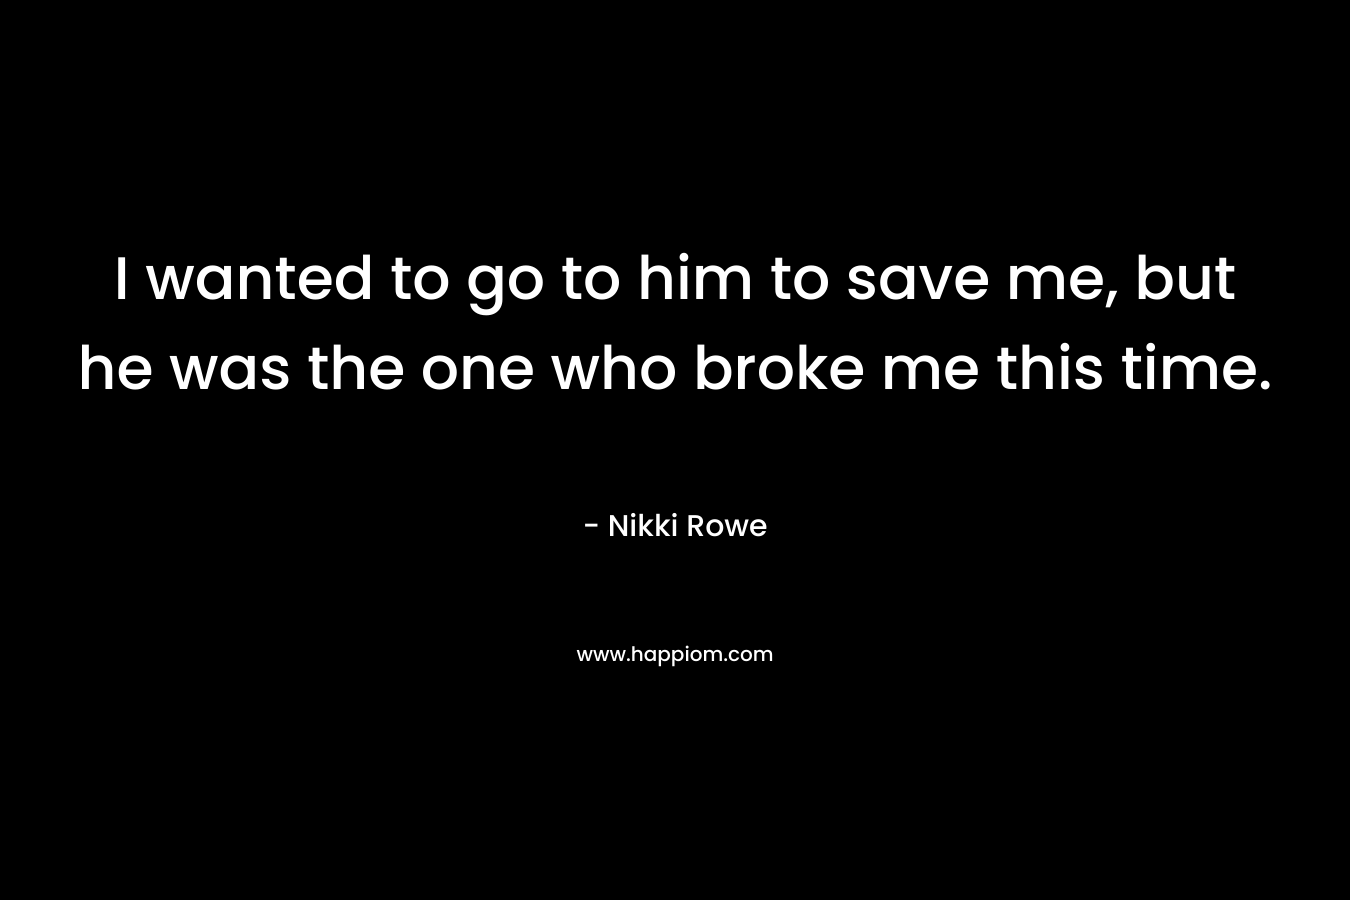 I wanted to go to him to save me, but he was the one who broke me this time.